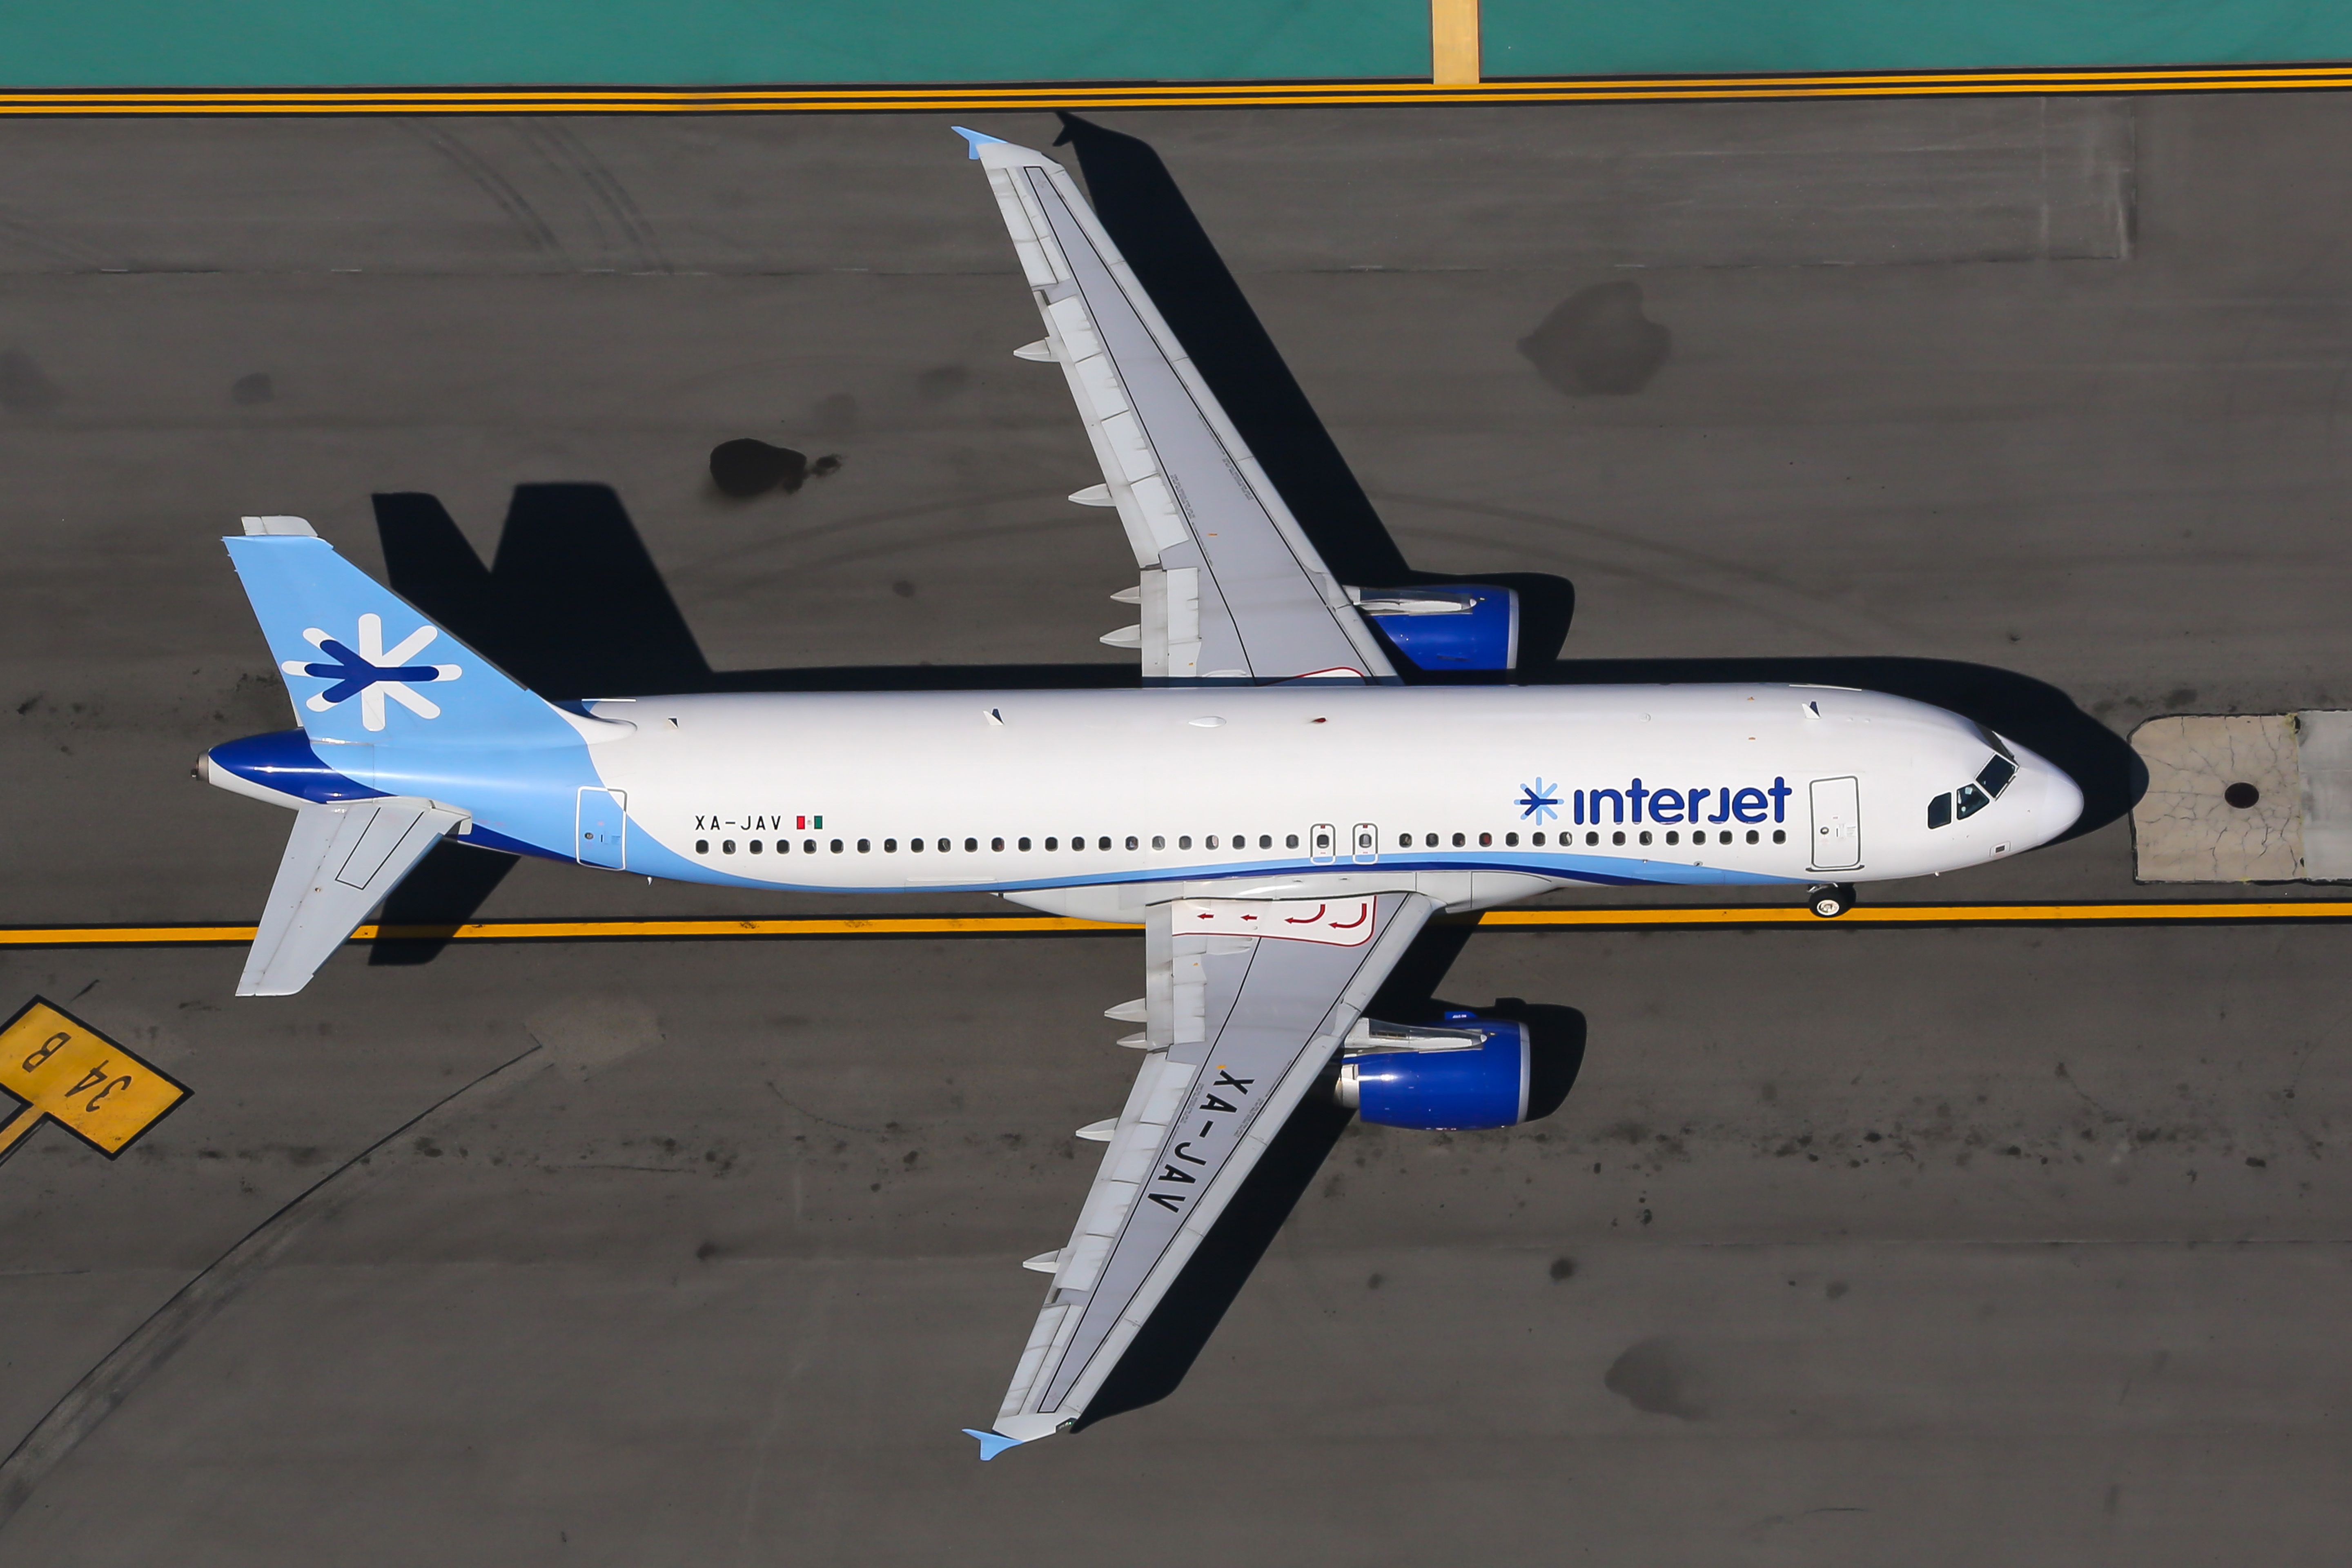 An Interjet Airbus A320 aircraft taxiing to the runway.